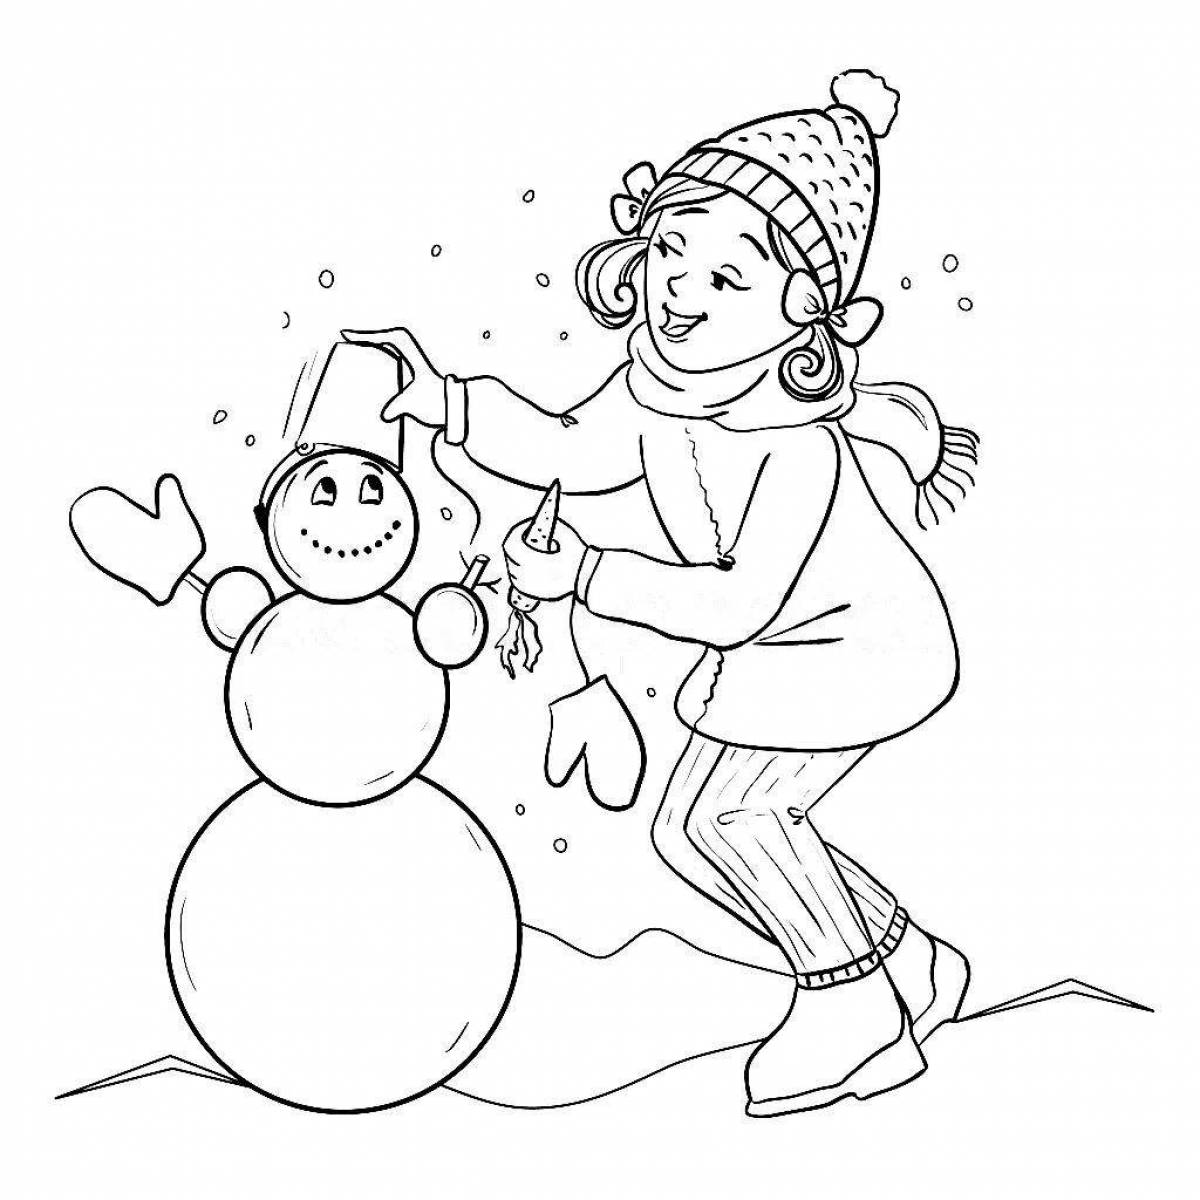 Shiny snowman coloring book for kids